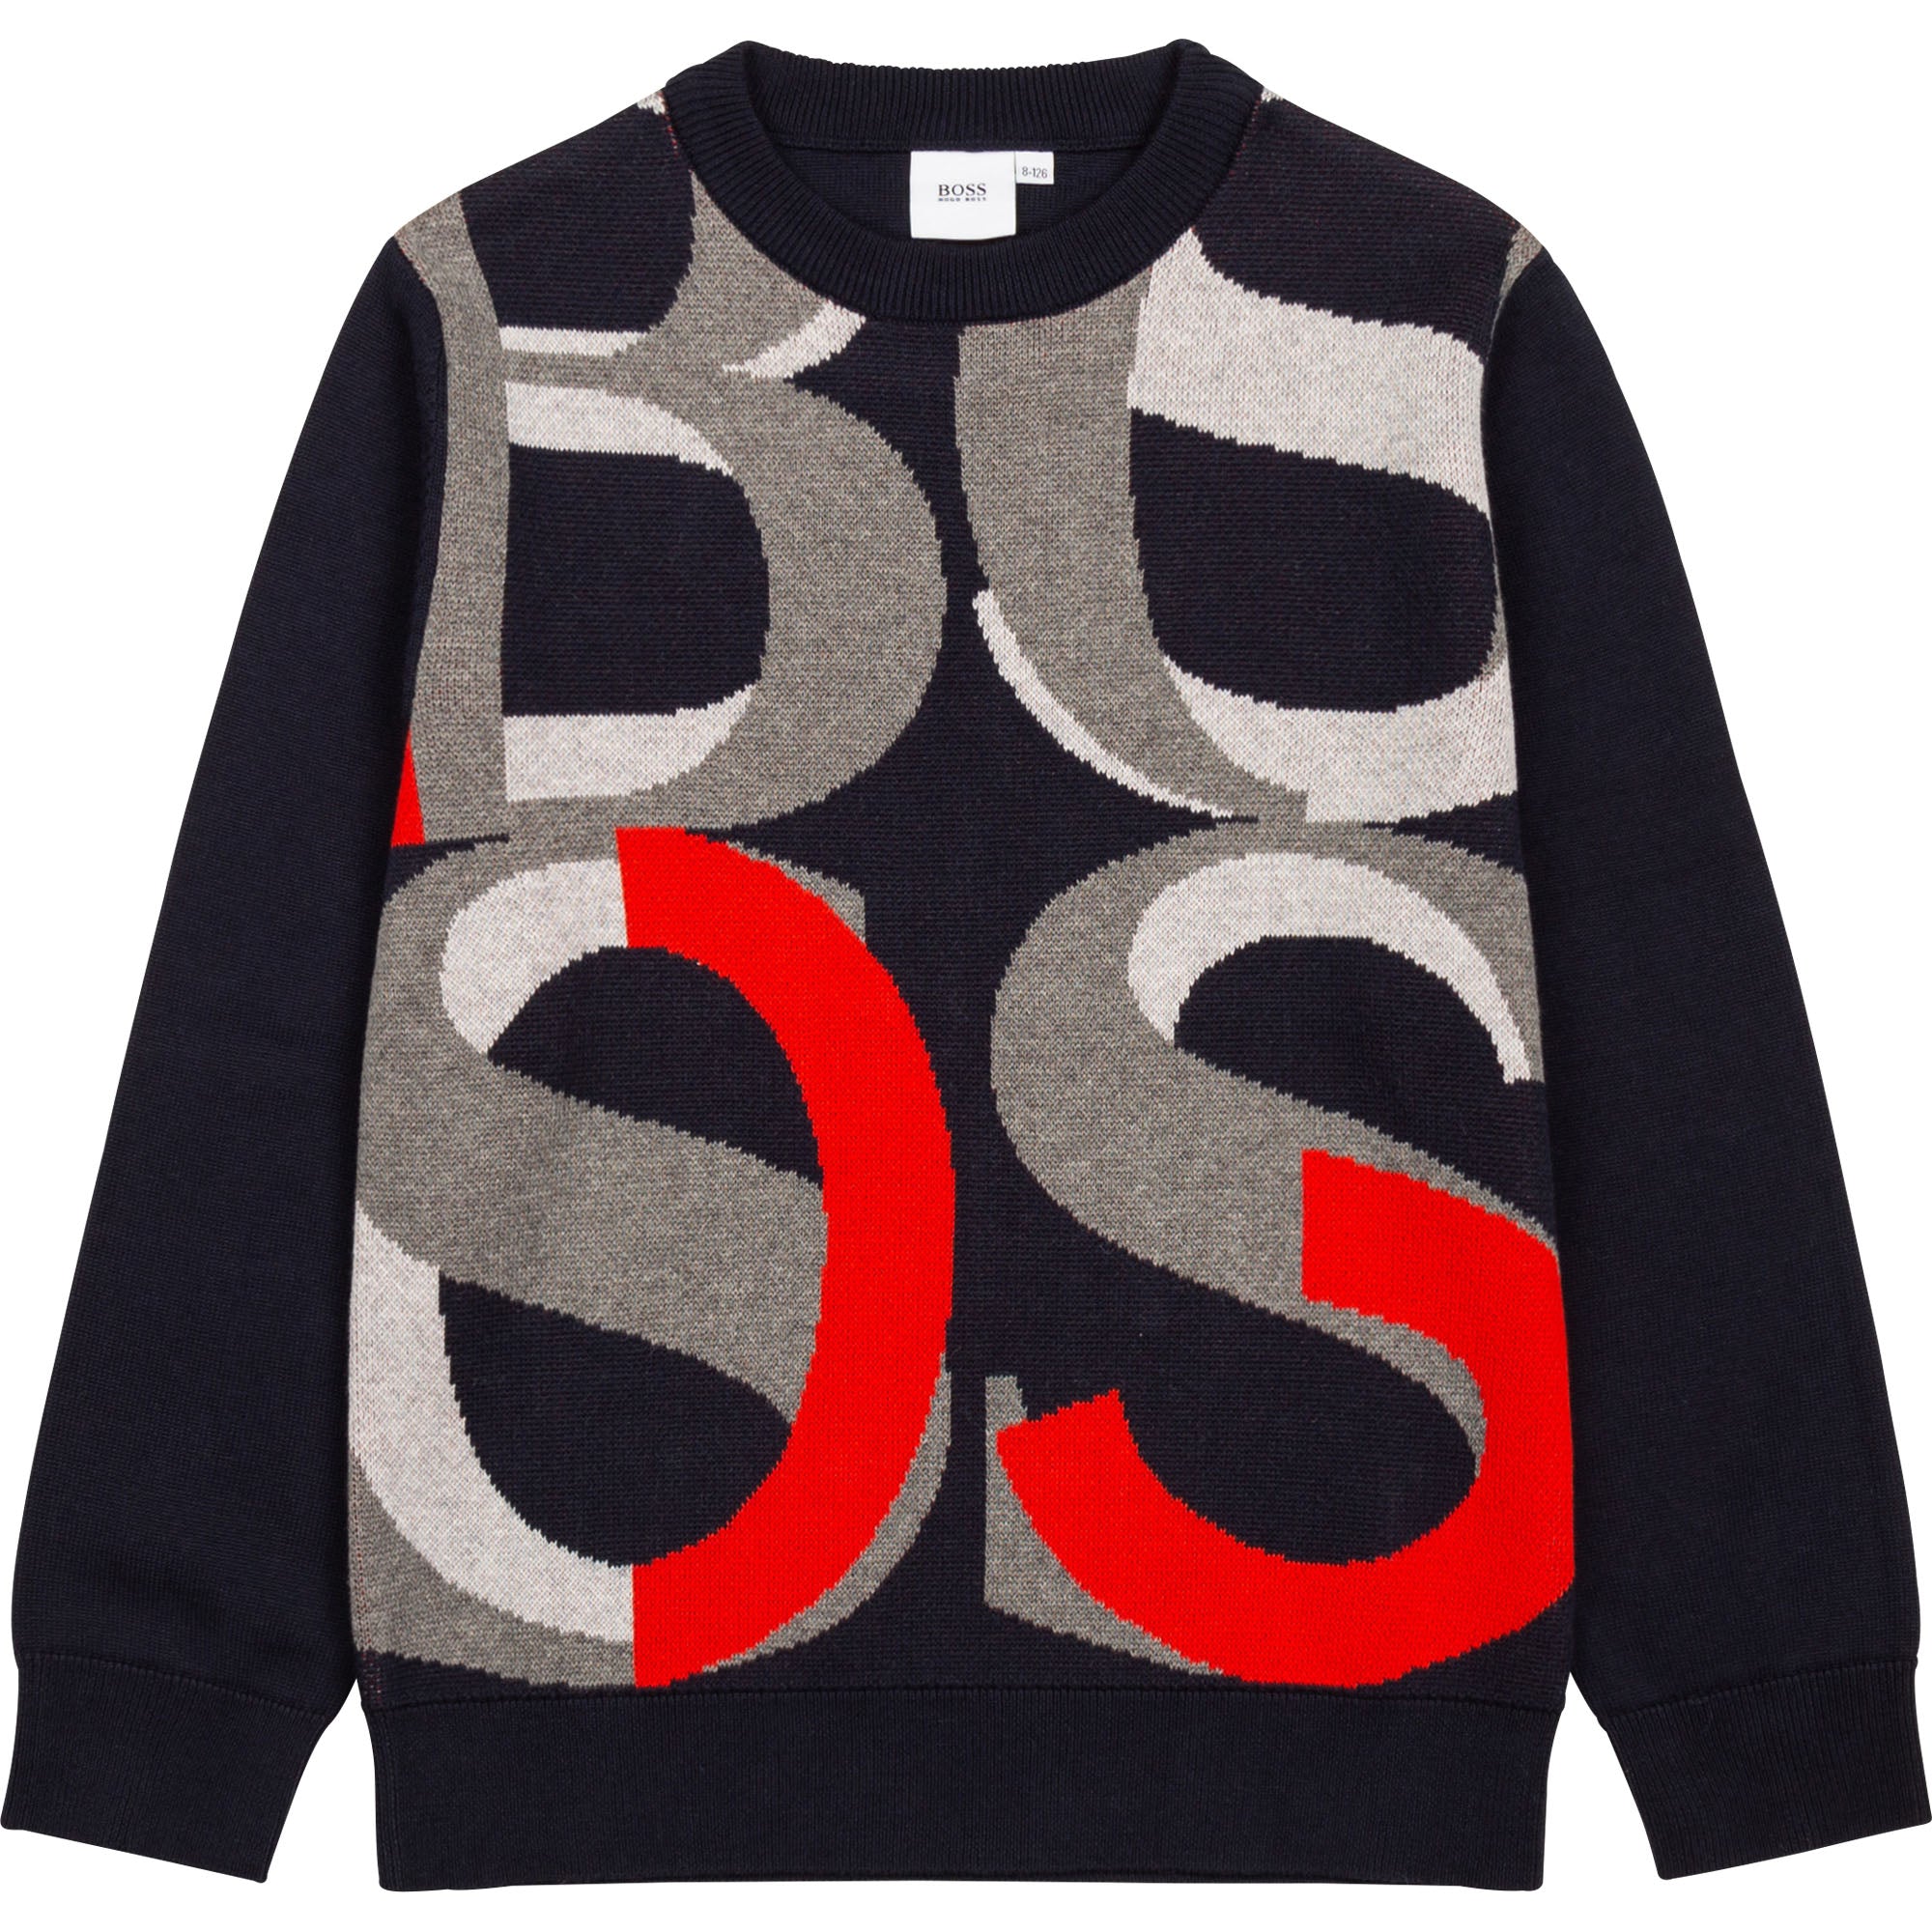 BOYS SWEATER WITH BOSS JACQUARED MINI ME, NAVY